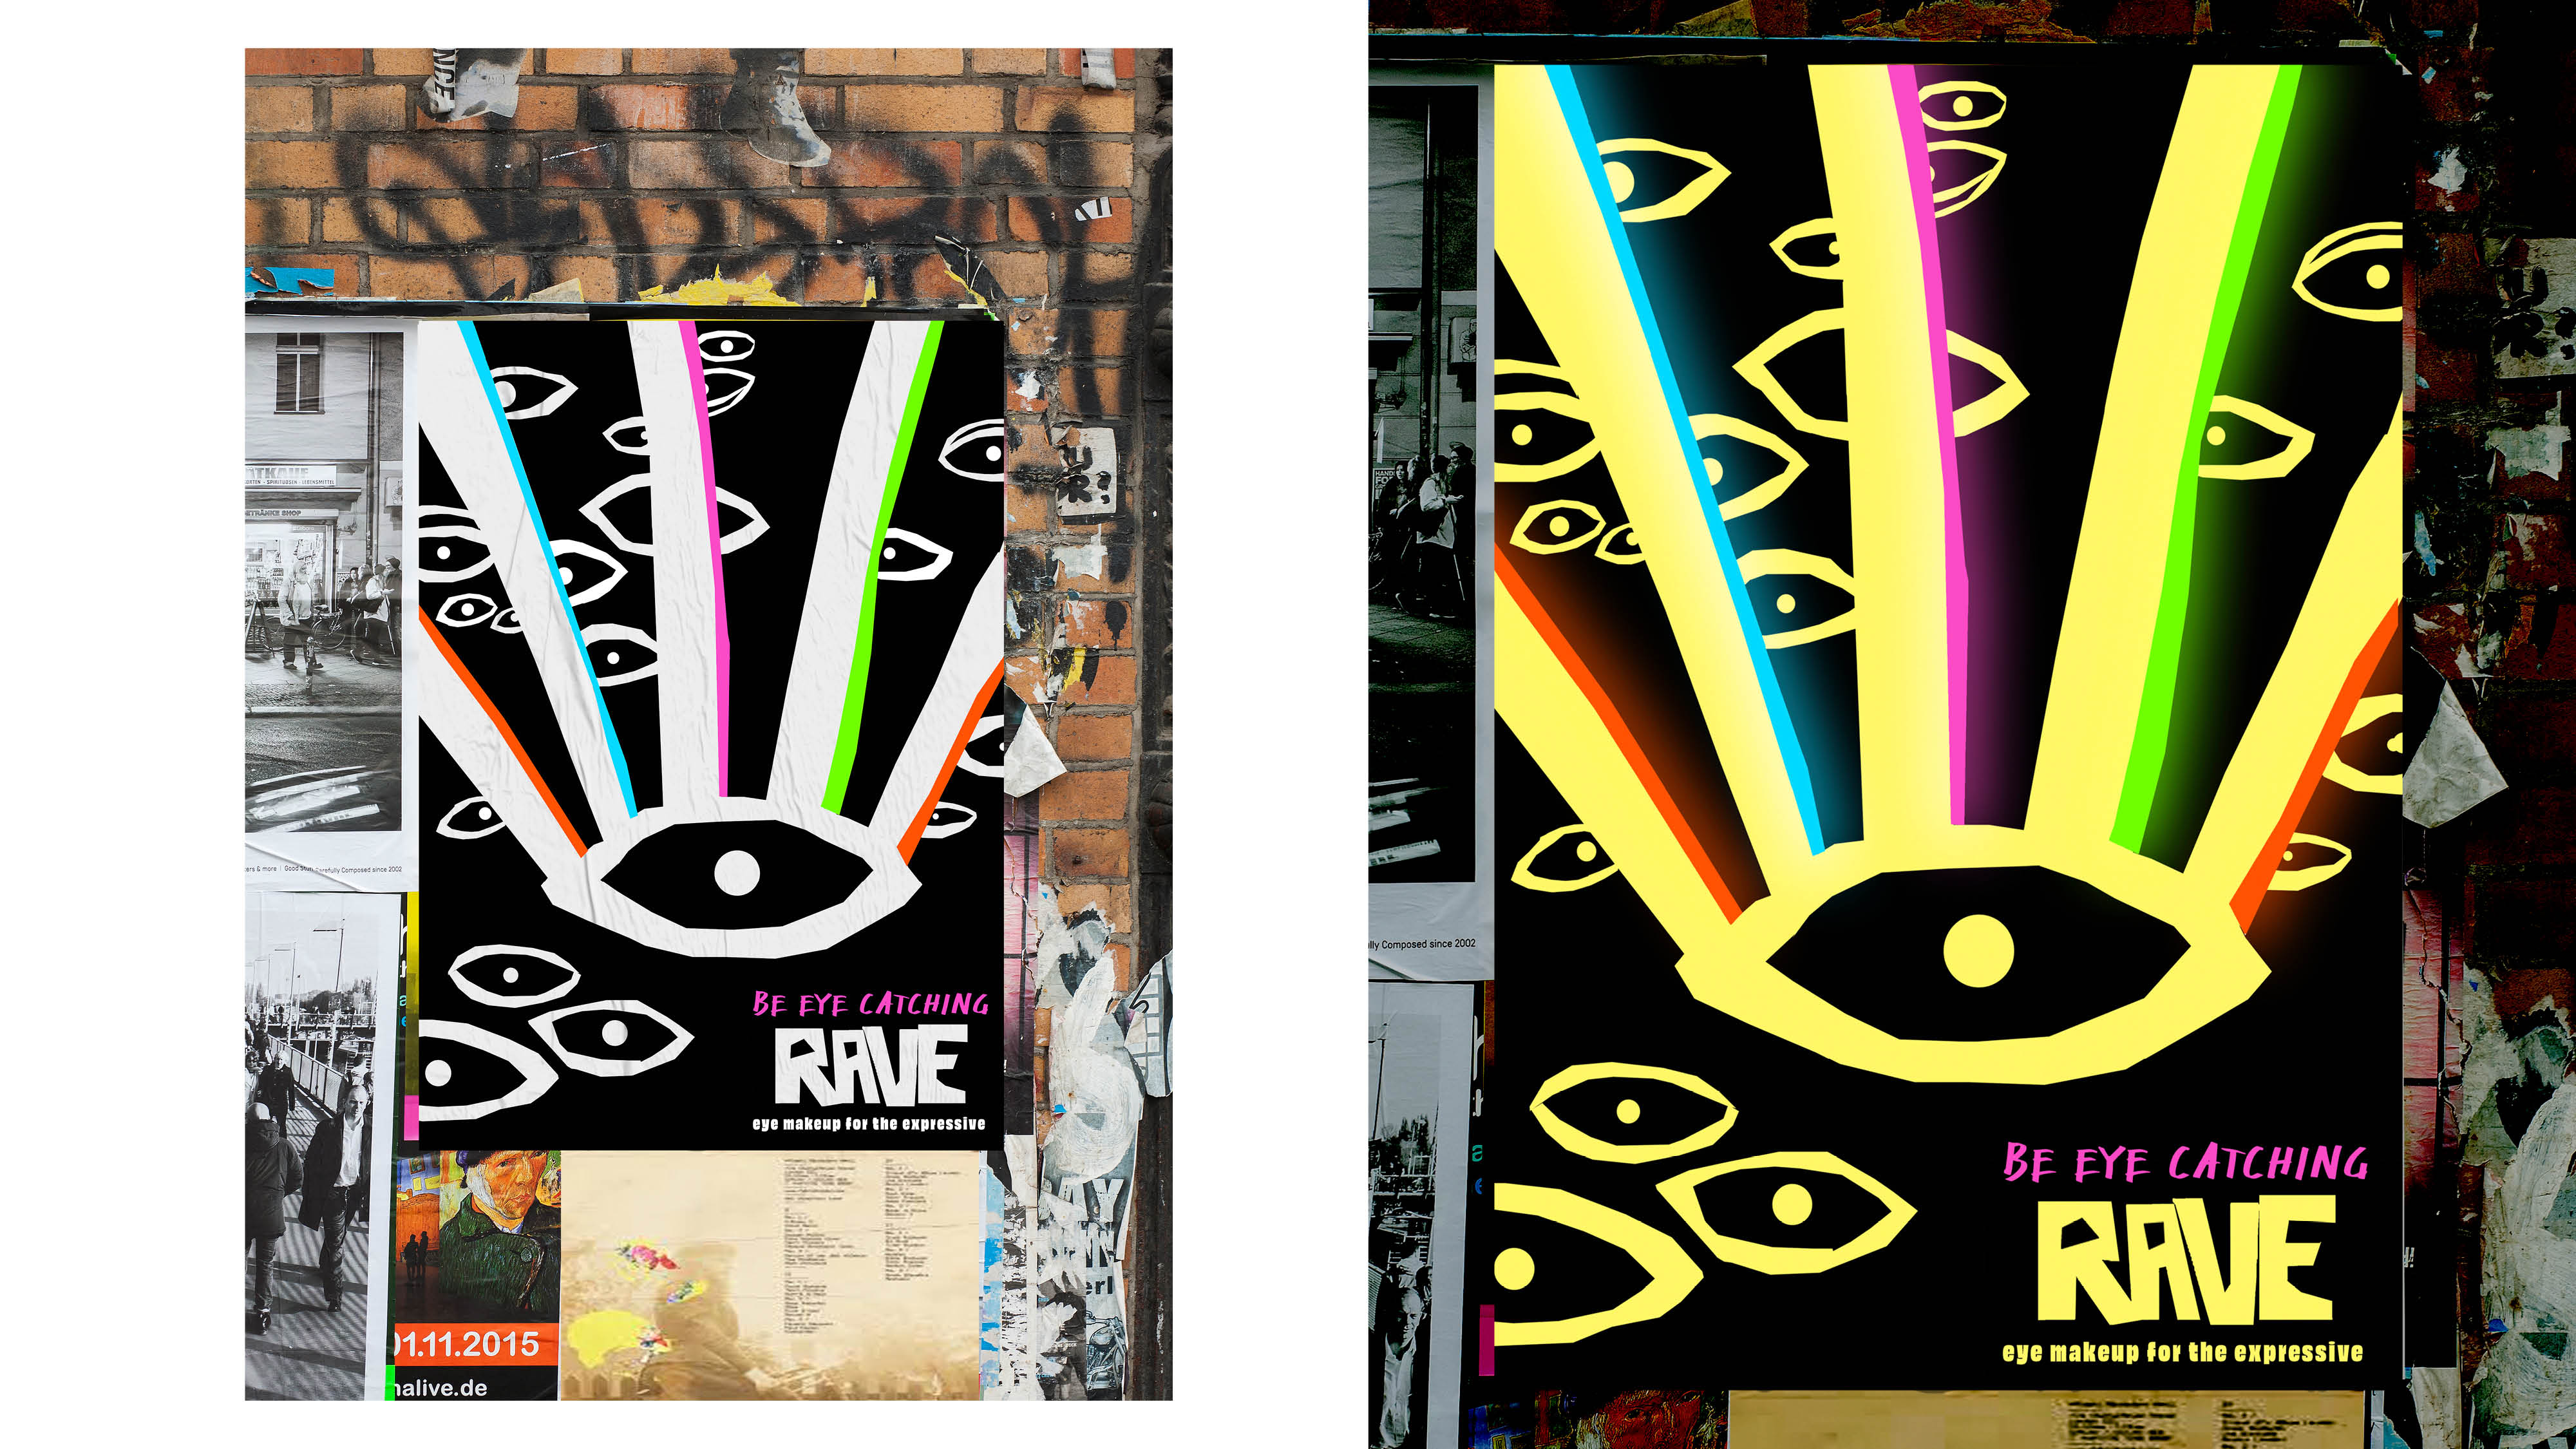 BA Graphic Designers work by Amber Mills-Rist showing RAVE brand posters highlighting Makeup for the expressive in acid house events.